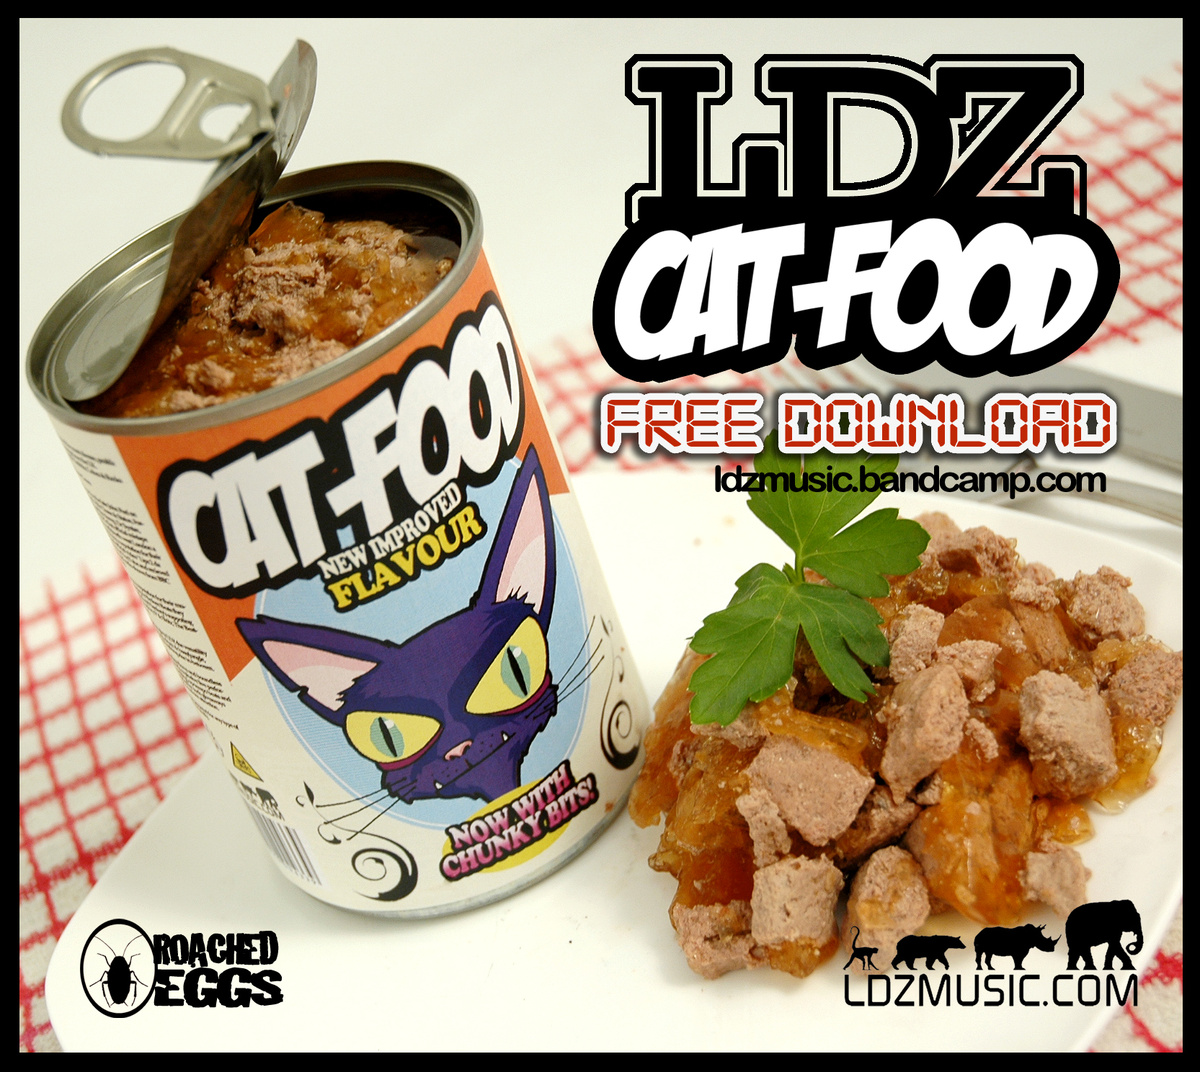 Catfood L.P.